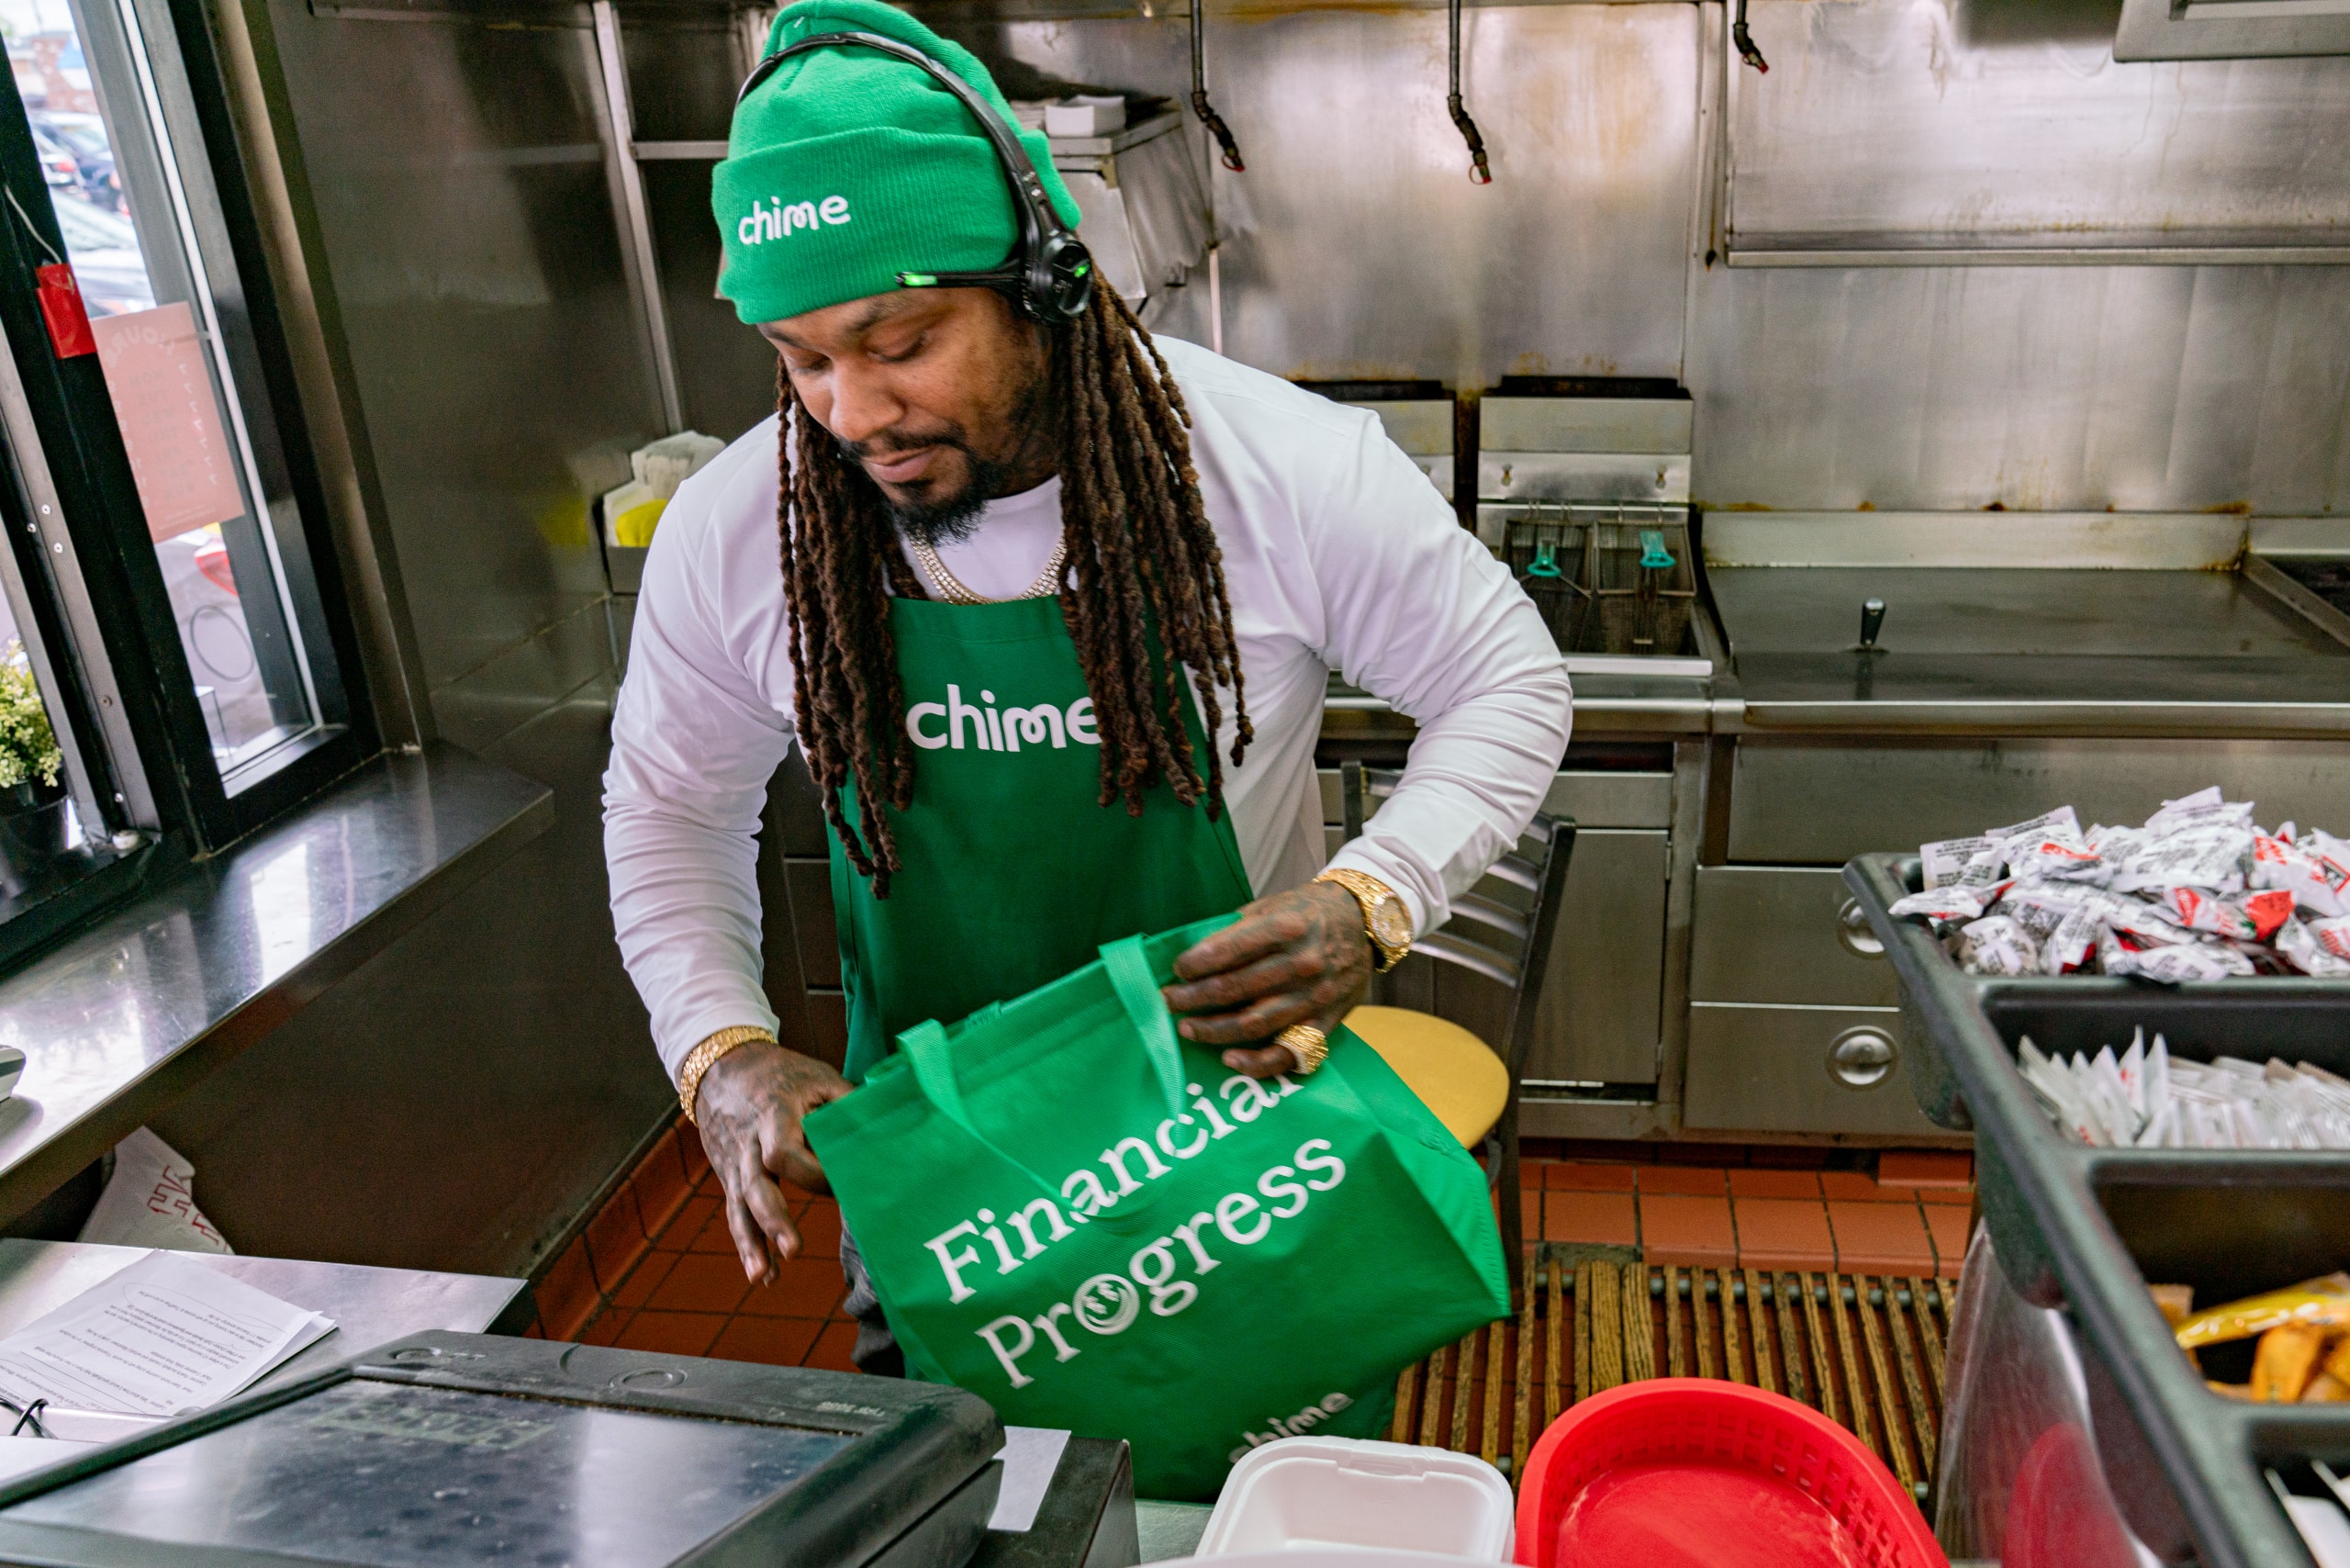 Marshawn Lynch and Chime Team Up to Talk Financial Progress